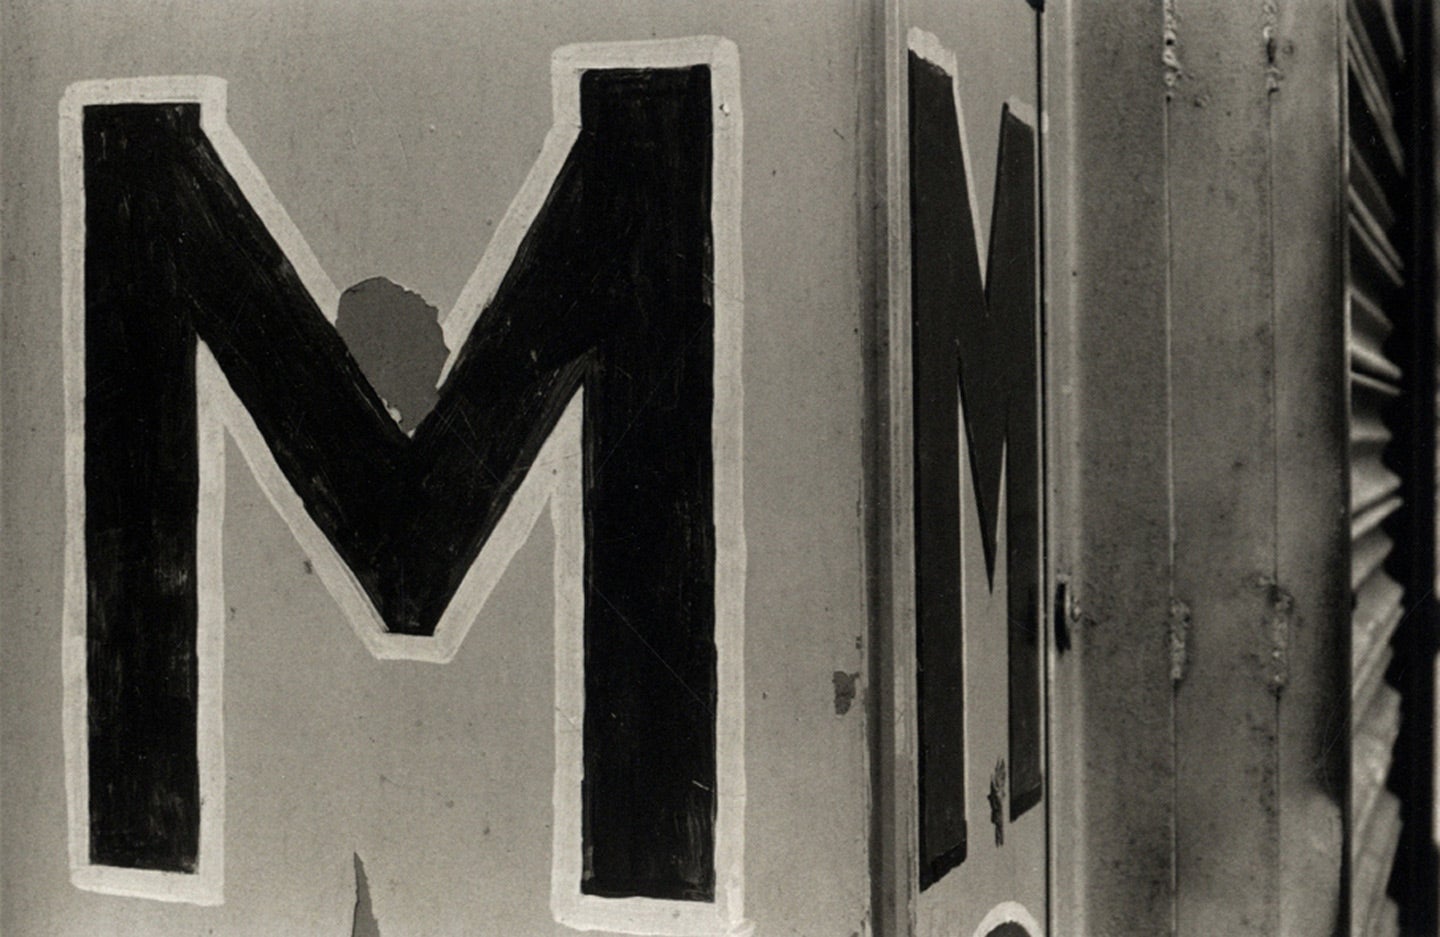 Lee Friedlander: Letters from the People (Special Limited Edition with One Vintage Gelatin Silver Print: "M")